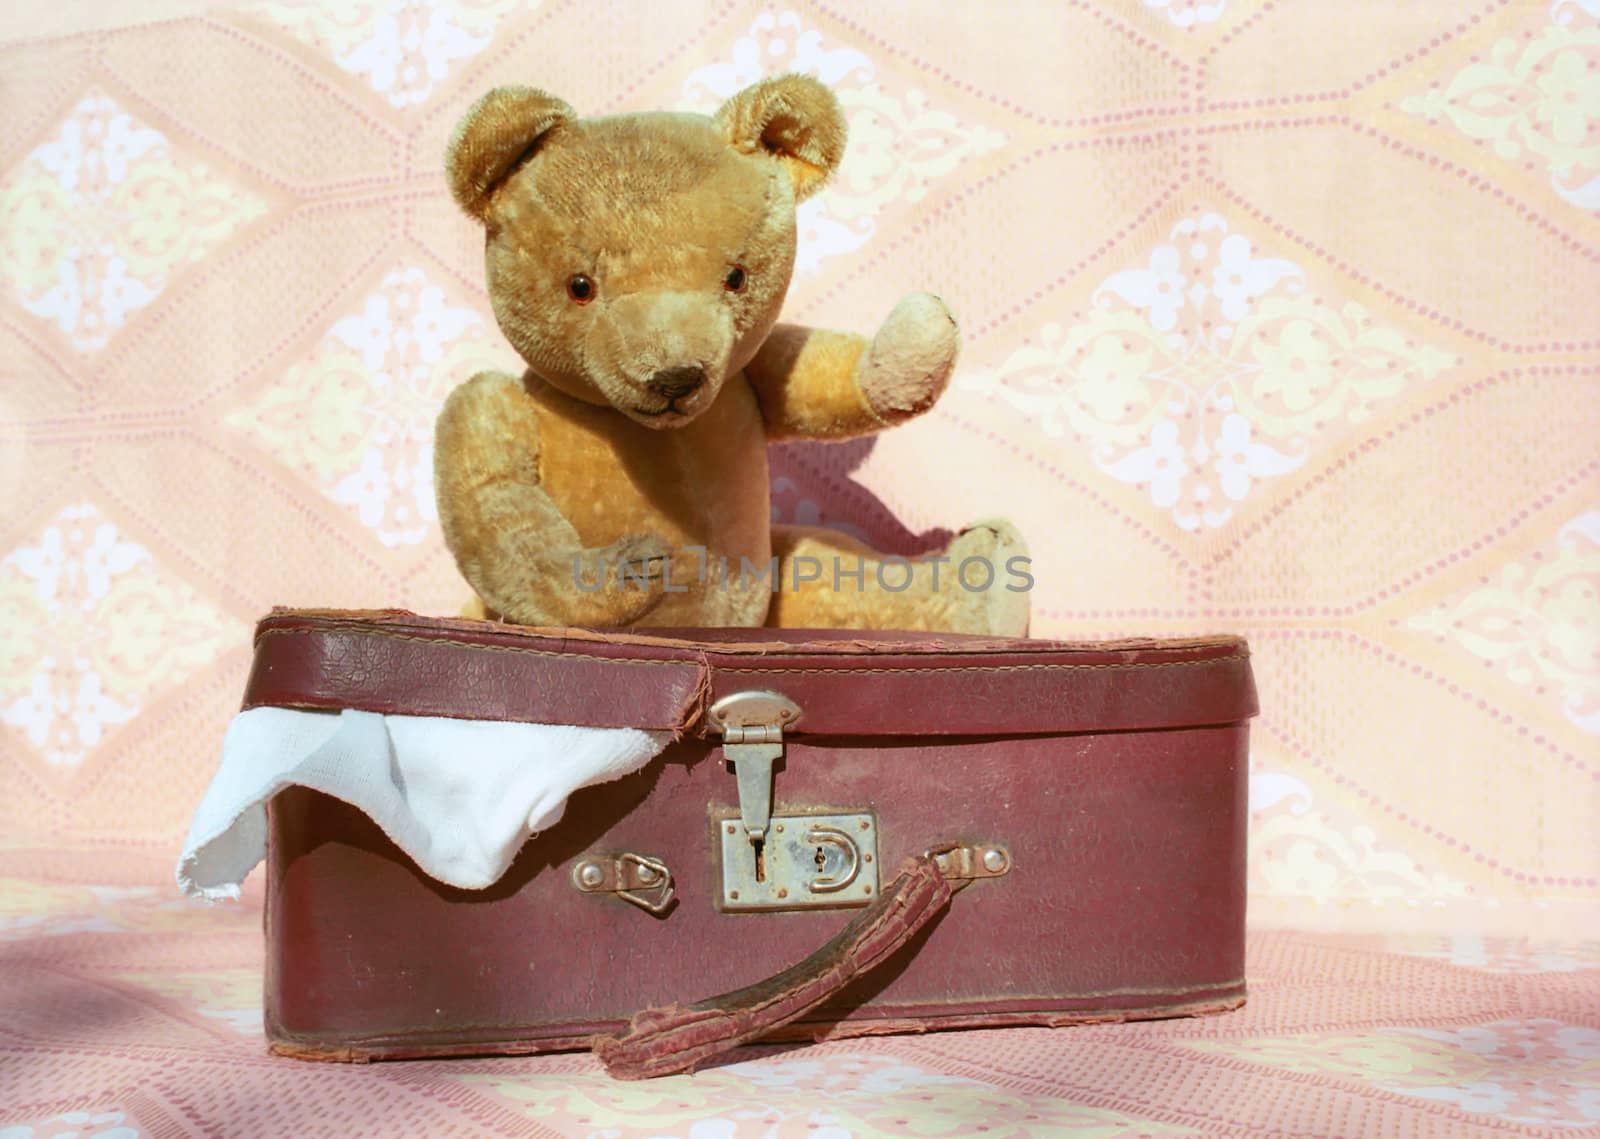 Old Teddy bear packs old suitcase